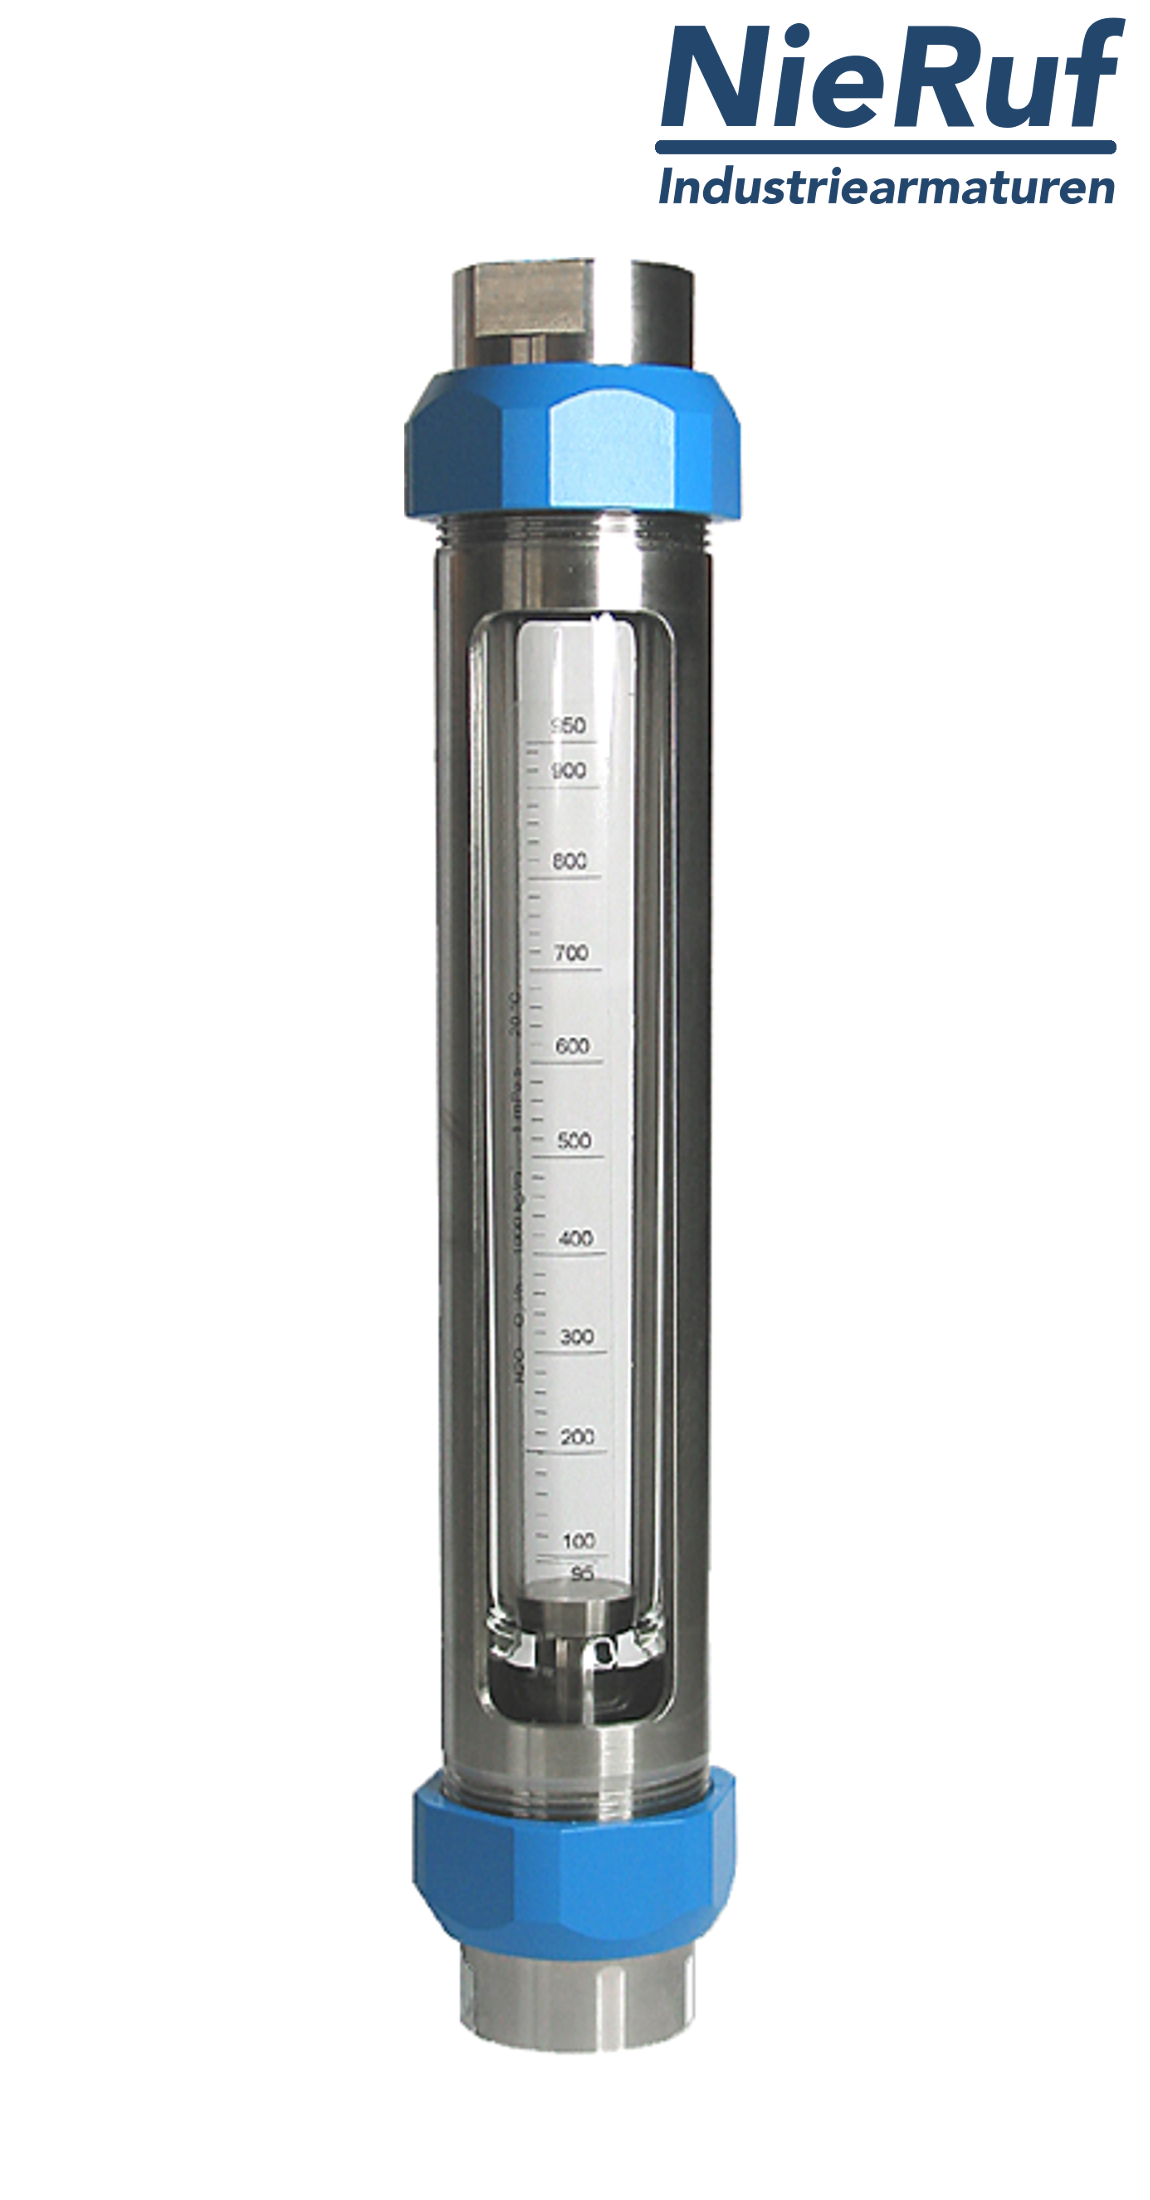 Variable area flowmeter stainless steel + borosilicate 1/4" inch 6.5 - 65.0 l/h water FKM